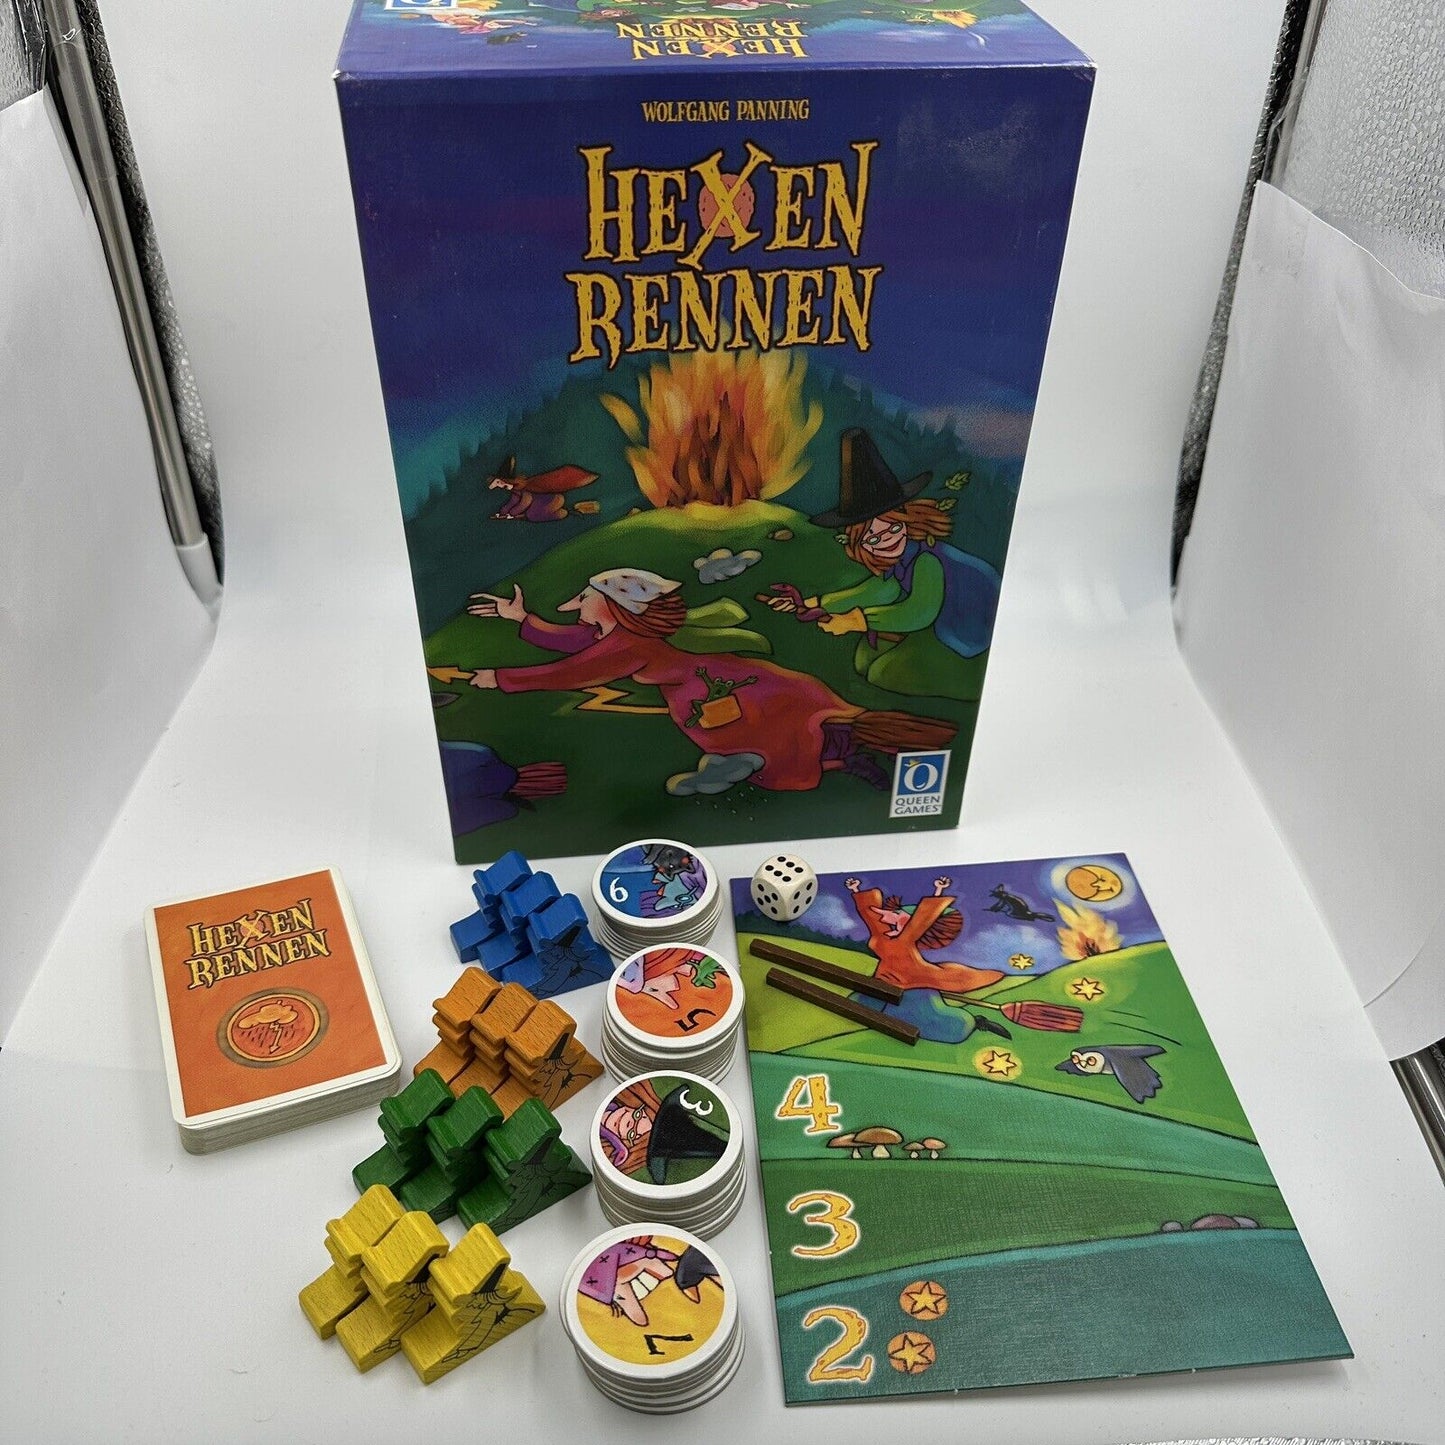 Hexen Rennen Racing Witches Queen Games Board Game Wooden Meeples English Rules